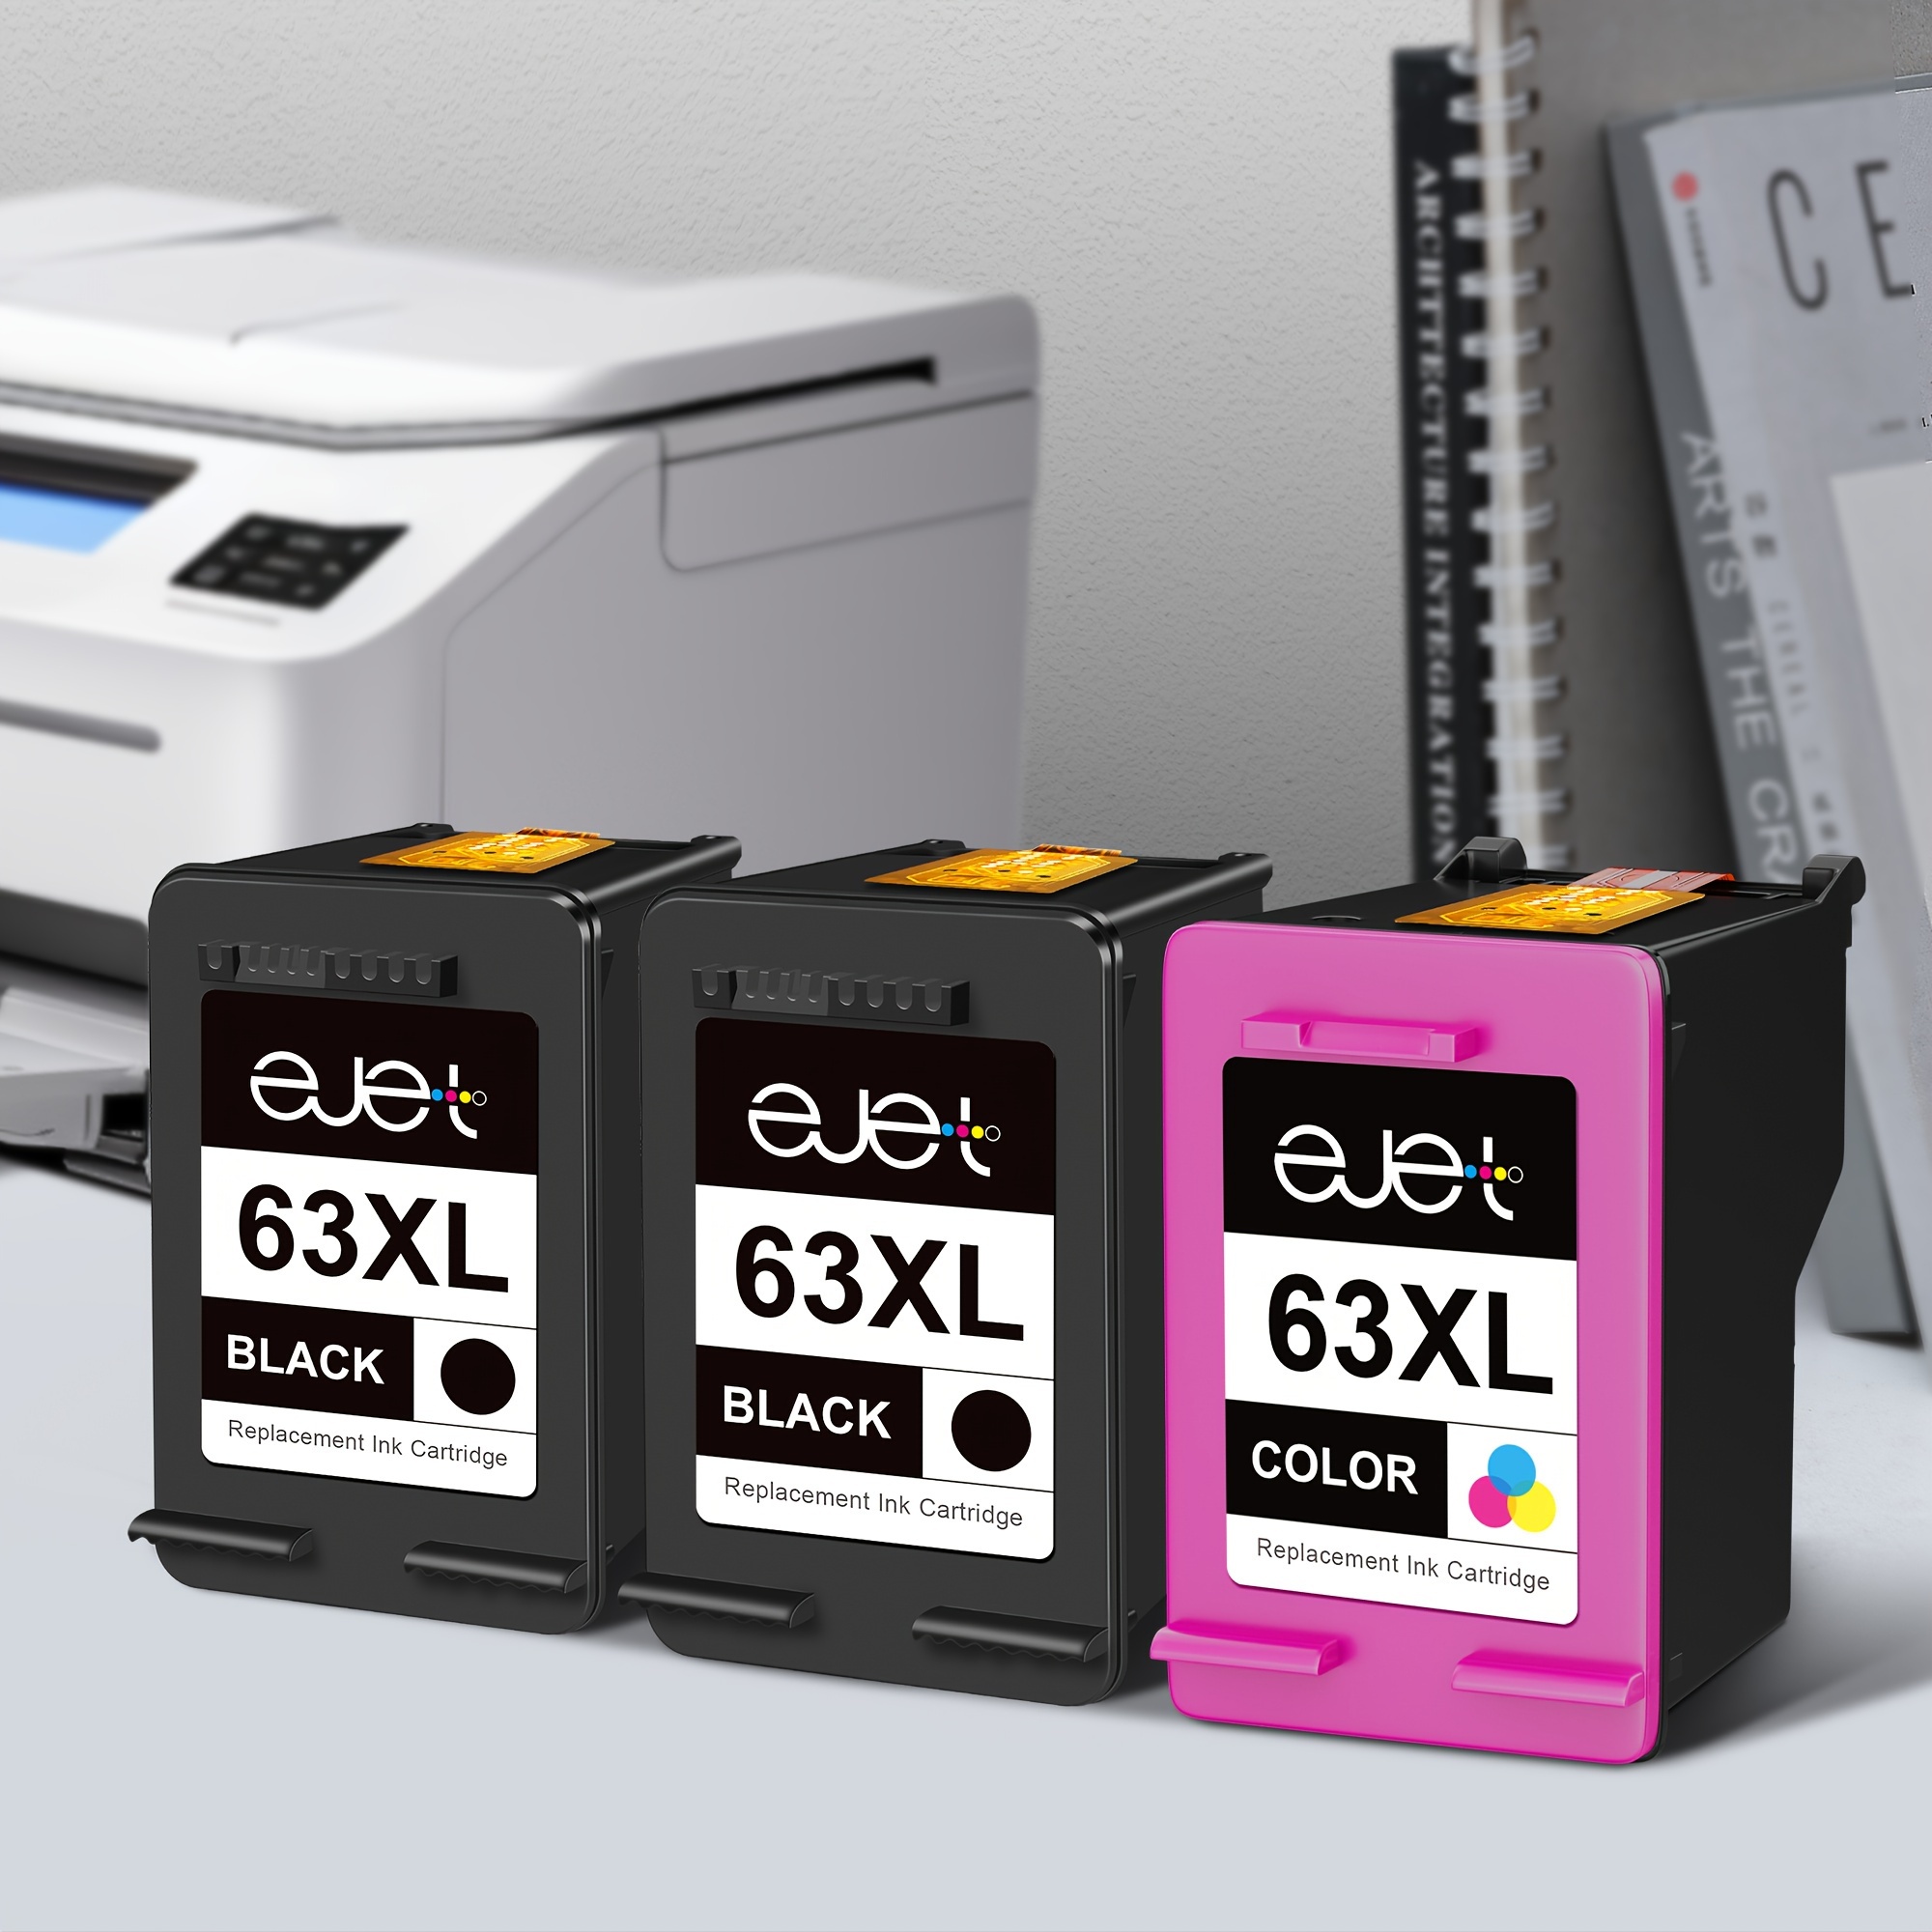 

3 Pack 63xl Ink Cartridge Remanufactured For Ink 63use With 3830 4650 4520 5252 5255 5258 4512 1112 3630 3632 4652 2132 5200 4655 4510 Printers